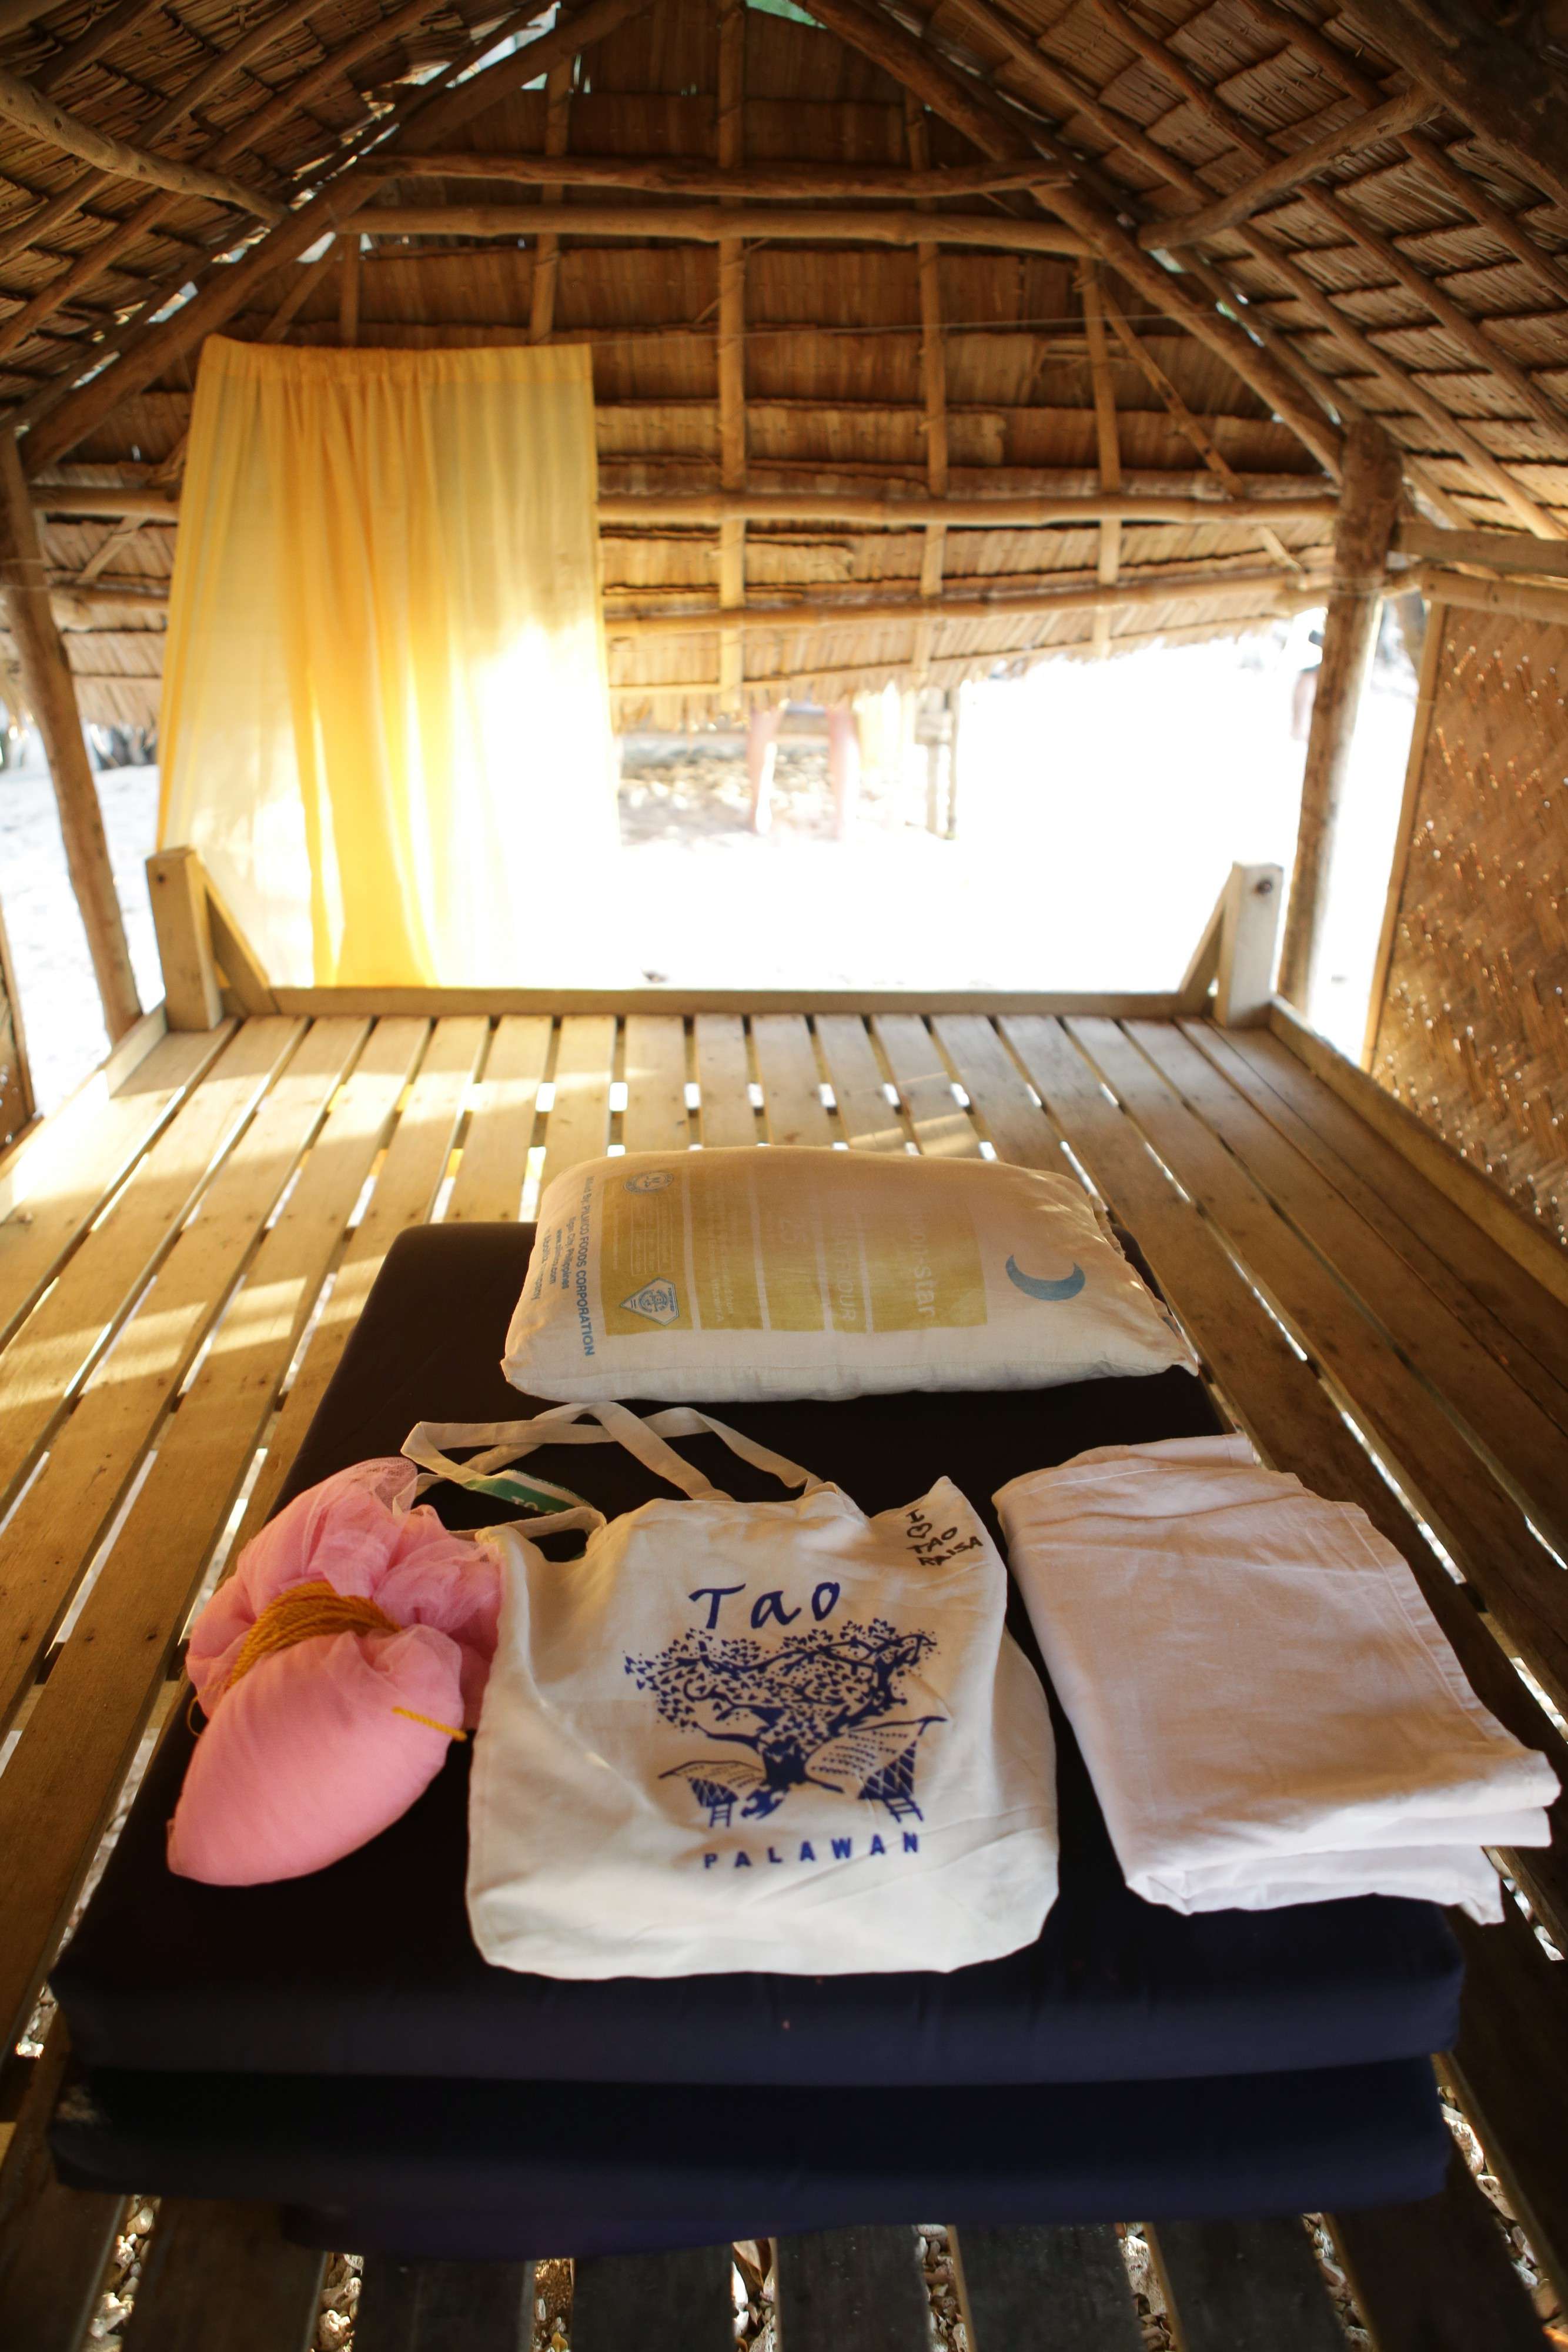 Inside a Tuka hut: The towels, bed linens, tote bags and other amenities provided to guests are all locally made by the islanders, who are also encouraged to create products for clients other than Tao, so that their business and incomes can grow.